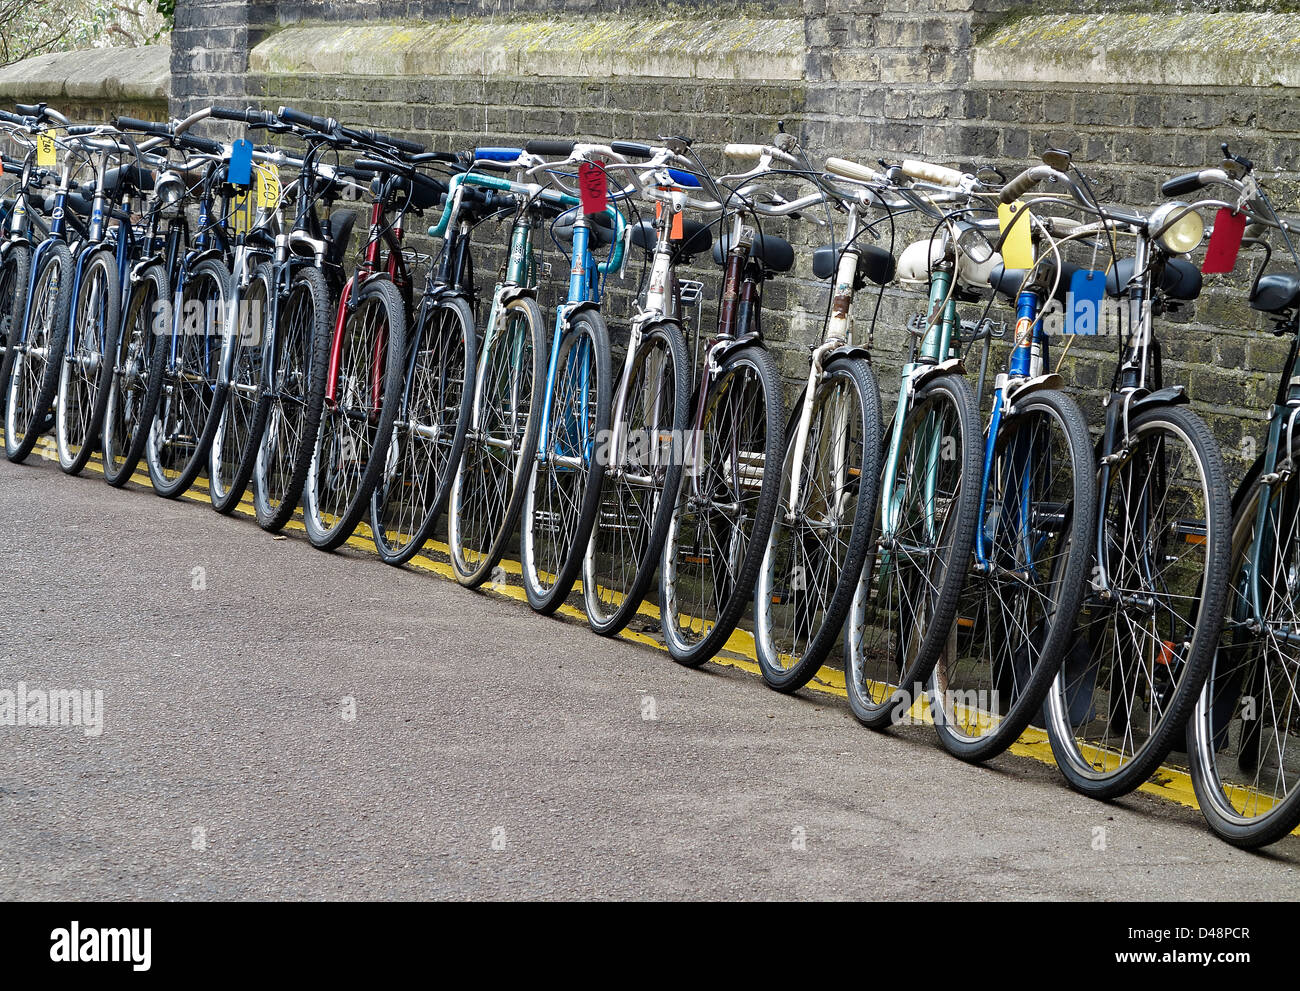 Bicycles lined up for sale Cambridge England Stock Photo